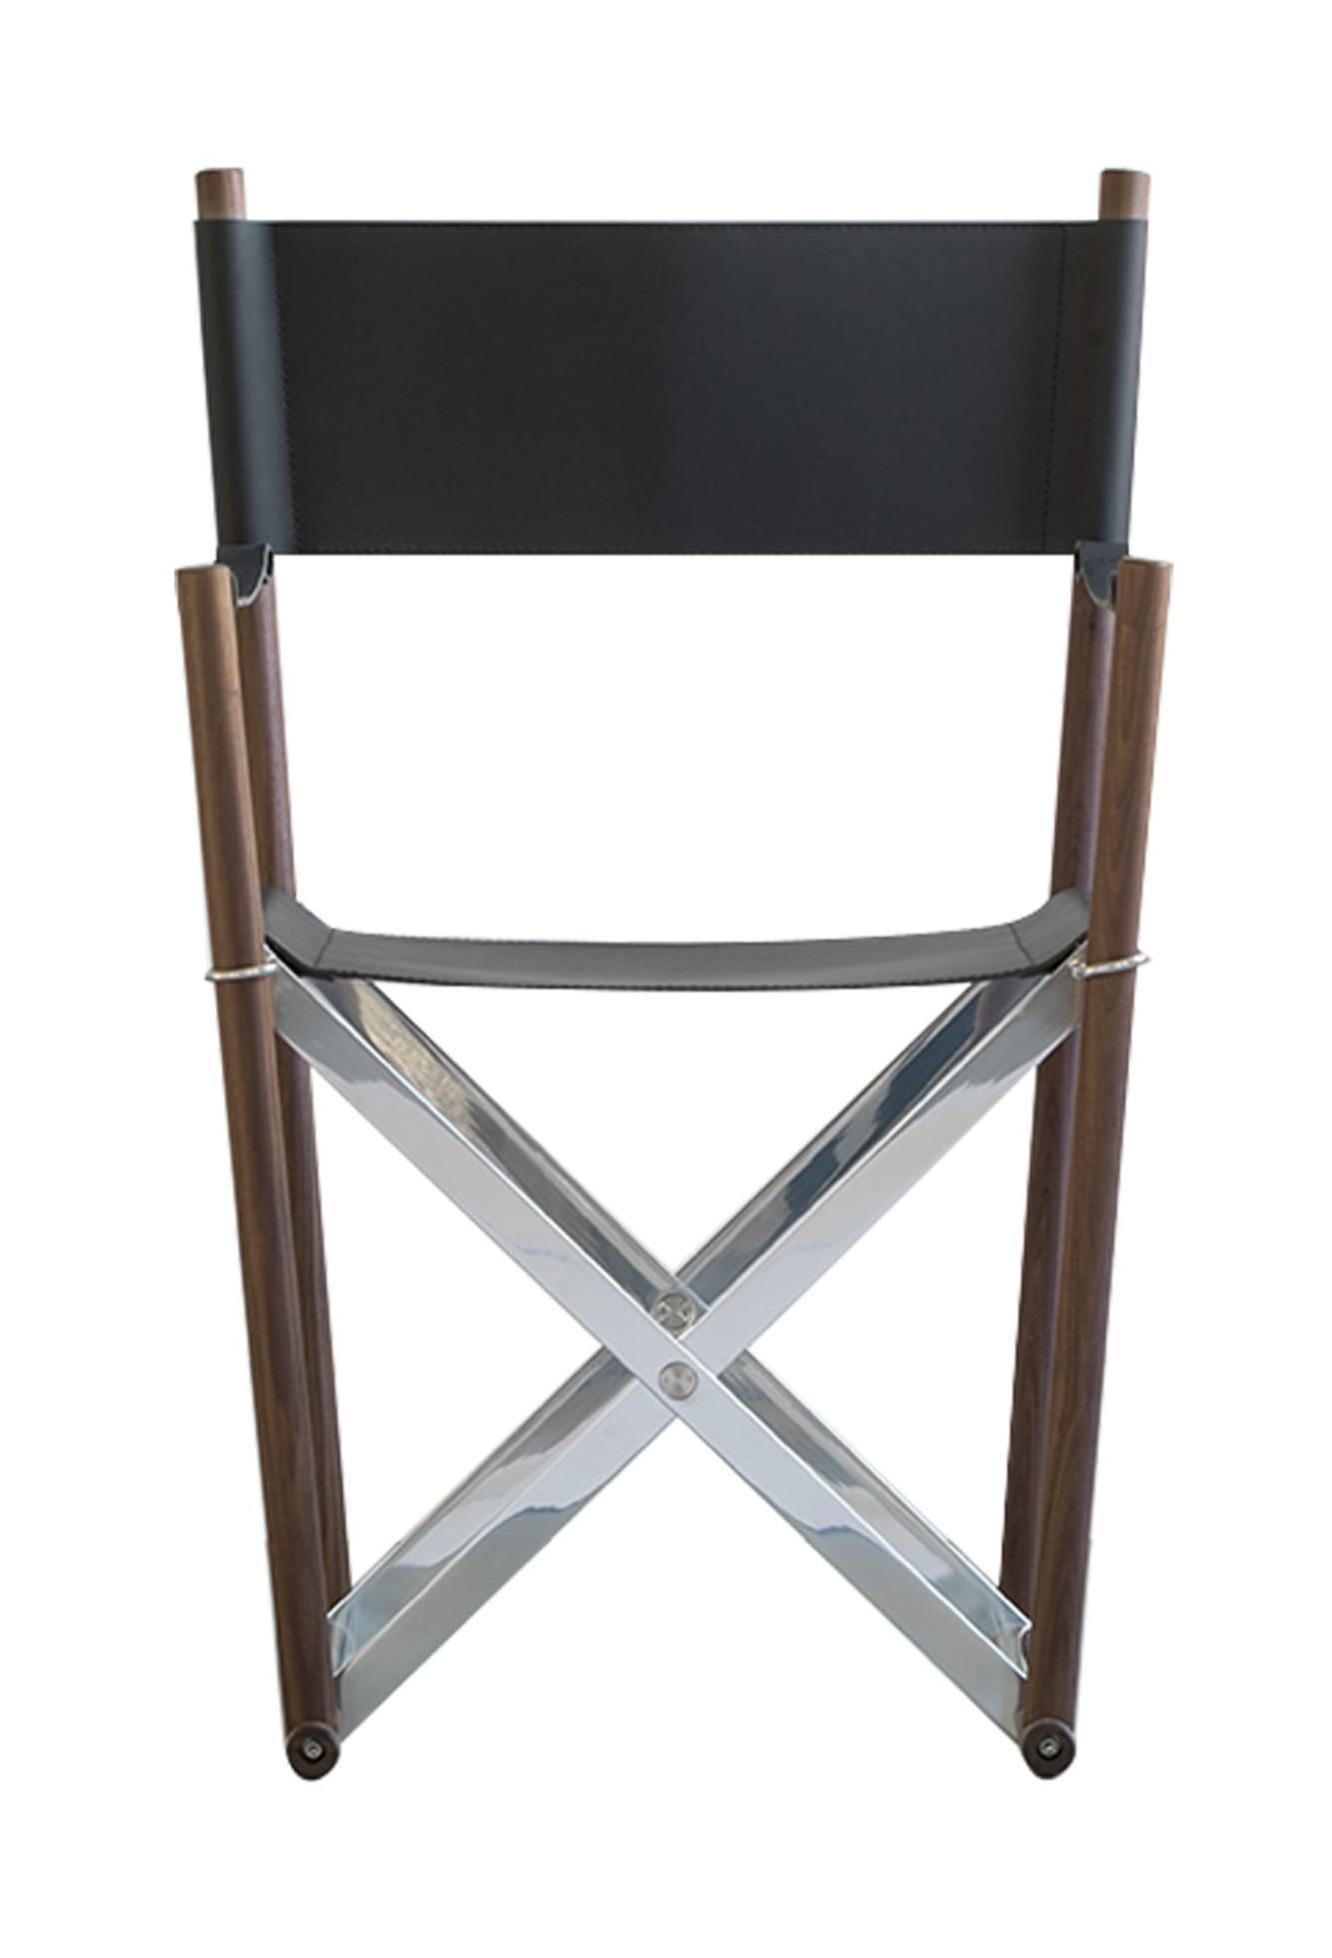 Regista Leather Exclusive Chair ☞ Base: Solid Black Walnut ☞ Seat: Leather